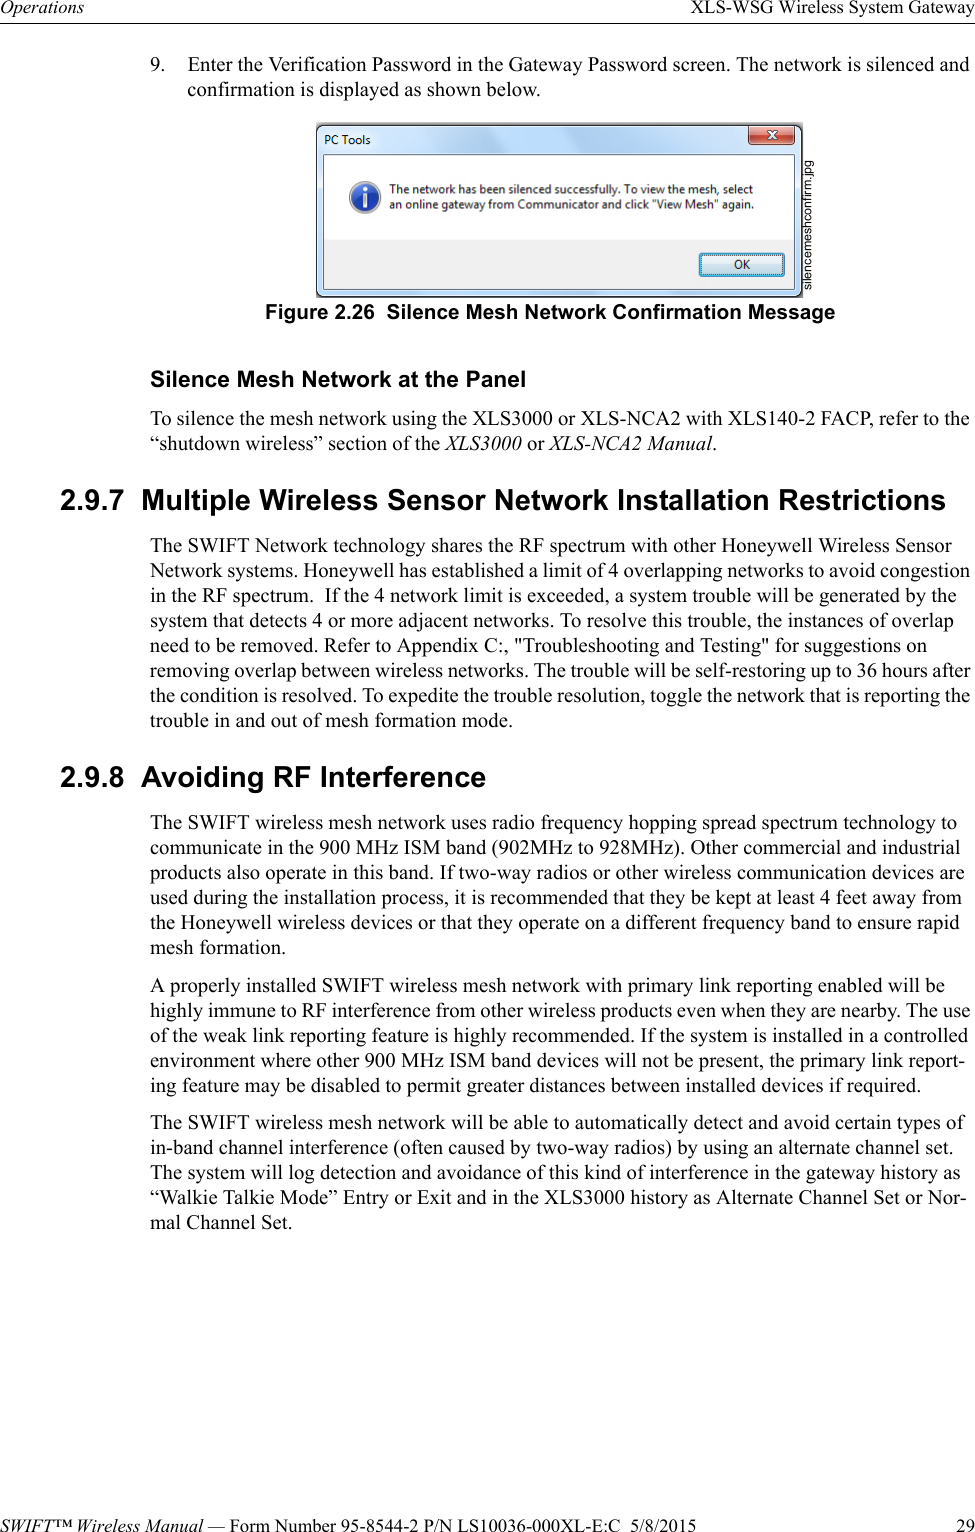 SWIFT™ Wireless Manual — Form Number 95-8544-2 P/N LS10036-000XL-E:C  5/8/2015  29Operations XLS-WSG Wireless System Gateway9. Enter the Verification Password in the Gateway Password screen. The network is silenced and confirmation is displayed as shown below.Silence Mesh Network at the PanelTo silence the mesh network using the XLS3000 or XLS-NCA2 with XLS140-2 FACP, refer to the “shutdown wireless” section of the XLS3000 or XLS-NCA2 Manual.2.9.7  Multiple Wireless Sensor Network Installation RestrictionsThe SWIFT Network technology shares the RF spectrum with other Honeywell Wireless Sensor Network systems. Honeywell has established a limit of 4 overlapping networks to avoid congestion in the RF spectrum.  If the 4 network limit is exceeded, a system trouble will be generated by the system that detects 4 or more adjacent networks. To resolve this trouble, the instances of overlap need to be removed. Refer to Appendix C:, &quot;Troubleshooting and Testing&quot; for suggestions on removing overlap between wireless networks. The trouble will be self-restoring up to 36 hours after the condition is resolved. To expedite the trouble resolution, toggle the network that is reporting the trouble in and out of mesh formation mode. 2.9.8  Avoiding RF InterferenceThe SWIFT wireless mesh network uses radio frequency hopping spread spectrum technology to communicate in the 900 MHz ISM band (902MHz to 928MHz). Other commercial and industrial products also operate in this band. If two-way radios or other wireless communication devices are used during the installation process, it is recommended that they be kept at least 4 feet away from the Honeywell wireless devices or that they operate on a different frequency band to ensure rapid mesh formation.A properly installed SWIFT wireless mesh network with primary link reporting enabled will be highly immune to RF interference from other wireless products even when they are nearby. The use of the weak link reporting feature is highly recommended. If the system is installed in a controlled environment where other 900 MHz ISM band devices will not be present, the primary link report-ing feature may be disabled to permit greater distances between installed devices if required.The SWIFT wireless mesh network will be able to automatically detect and avoid certain types of in-band channel interference (often caused by two-way radios) by using an alternate channel set.  The system will log detection and avoidance of this kind of interference in the gateway history as “Walkie Talkie Mode” Entry or Exit and in the XLS3000 history as Alternate Channel Set or Nor-mal Channel Set.silencemeshconfirm.jpgFigure 2.26  Silence Mesh Network Confirmation Message